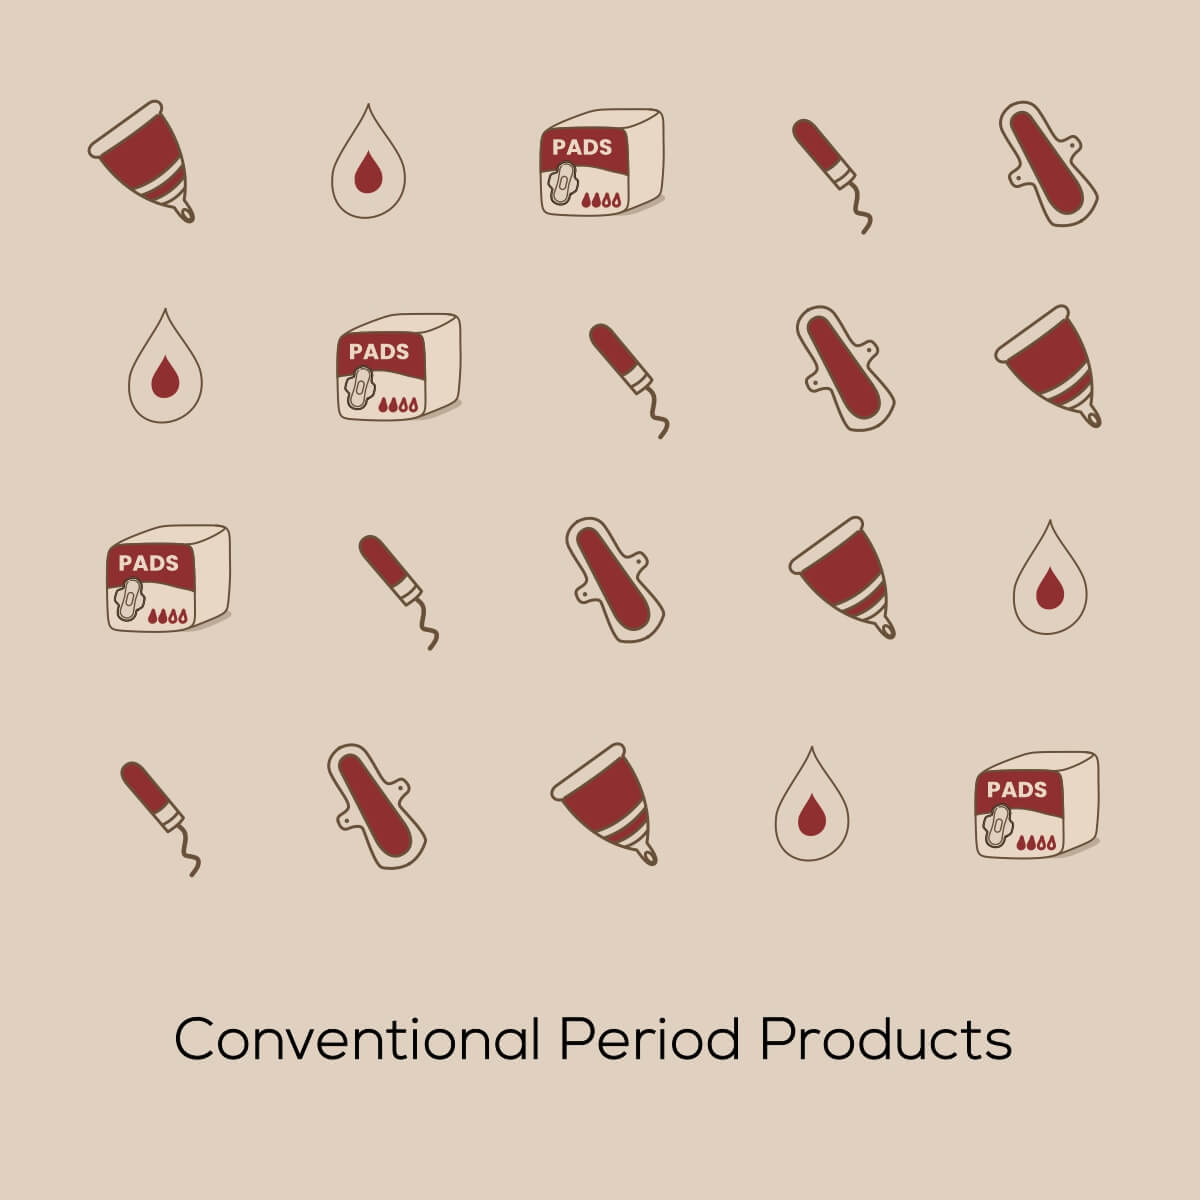 Environmental impact of period products